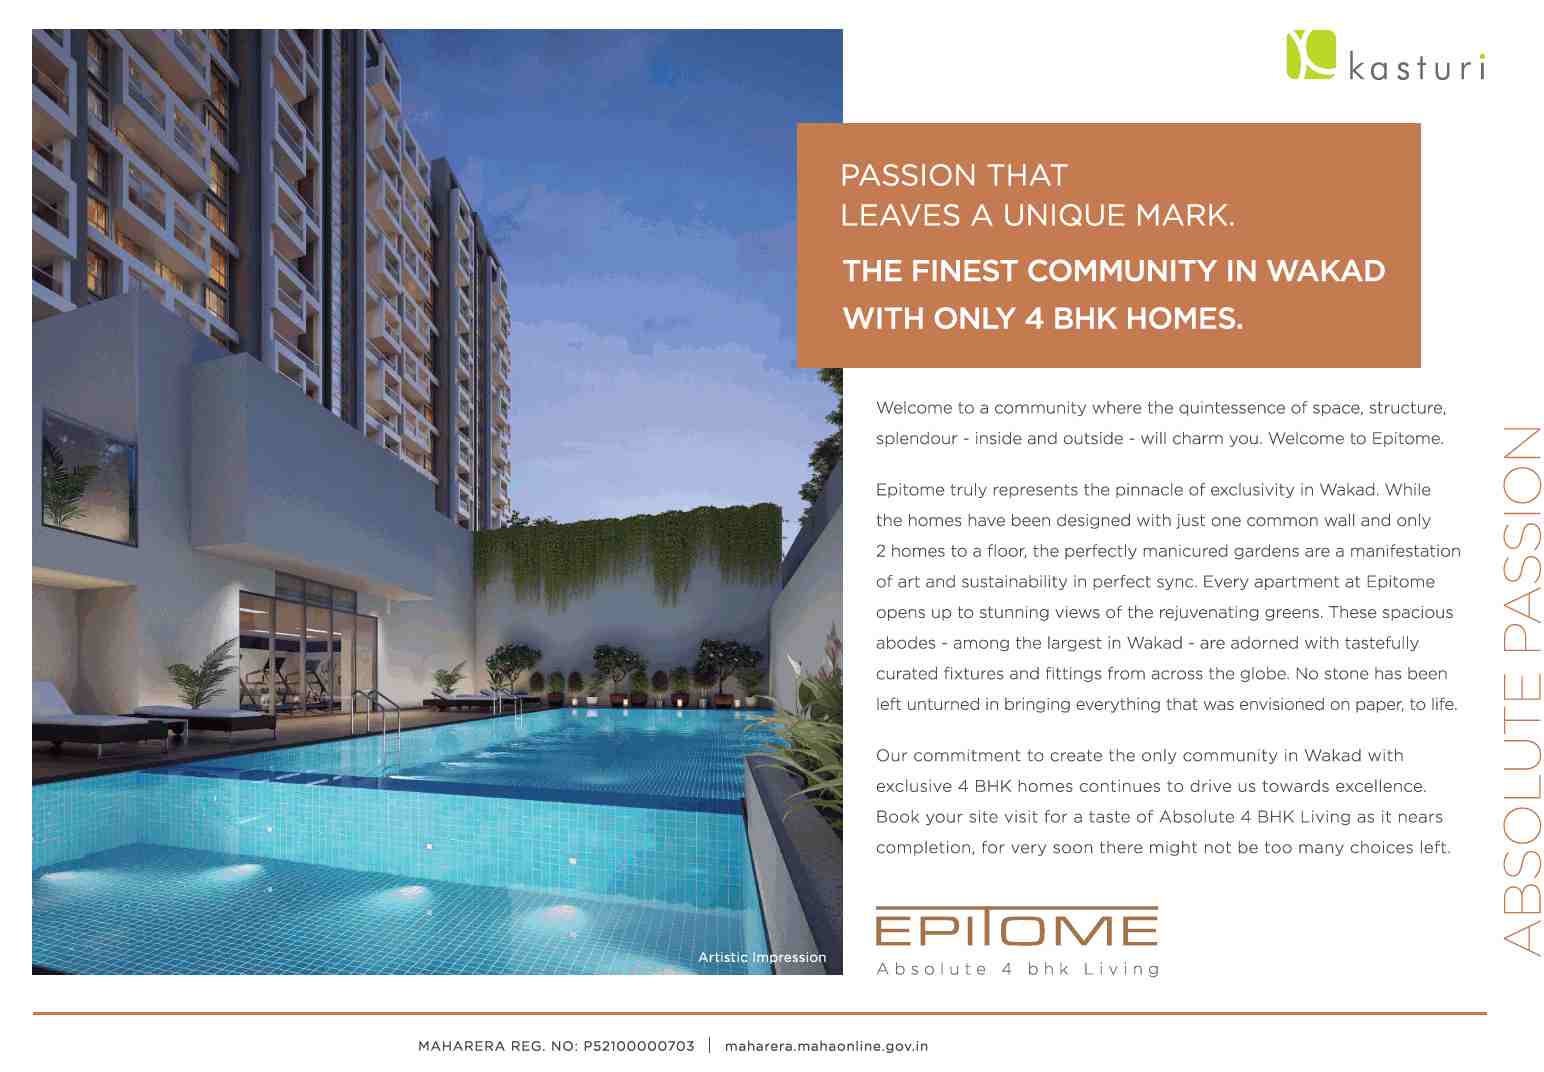 Live in the finest community with only 4 BHK homes at Kasturi Epitome in Pune Update